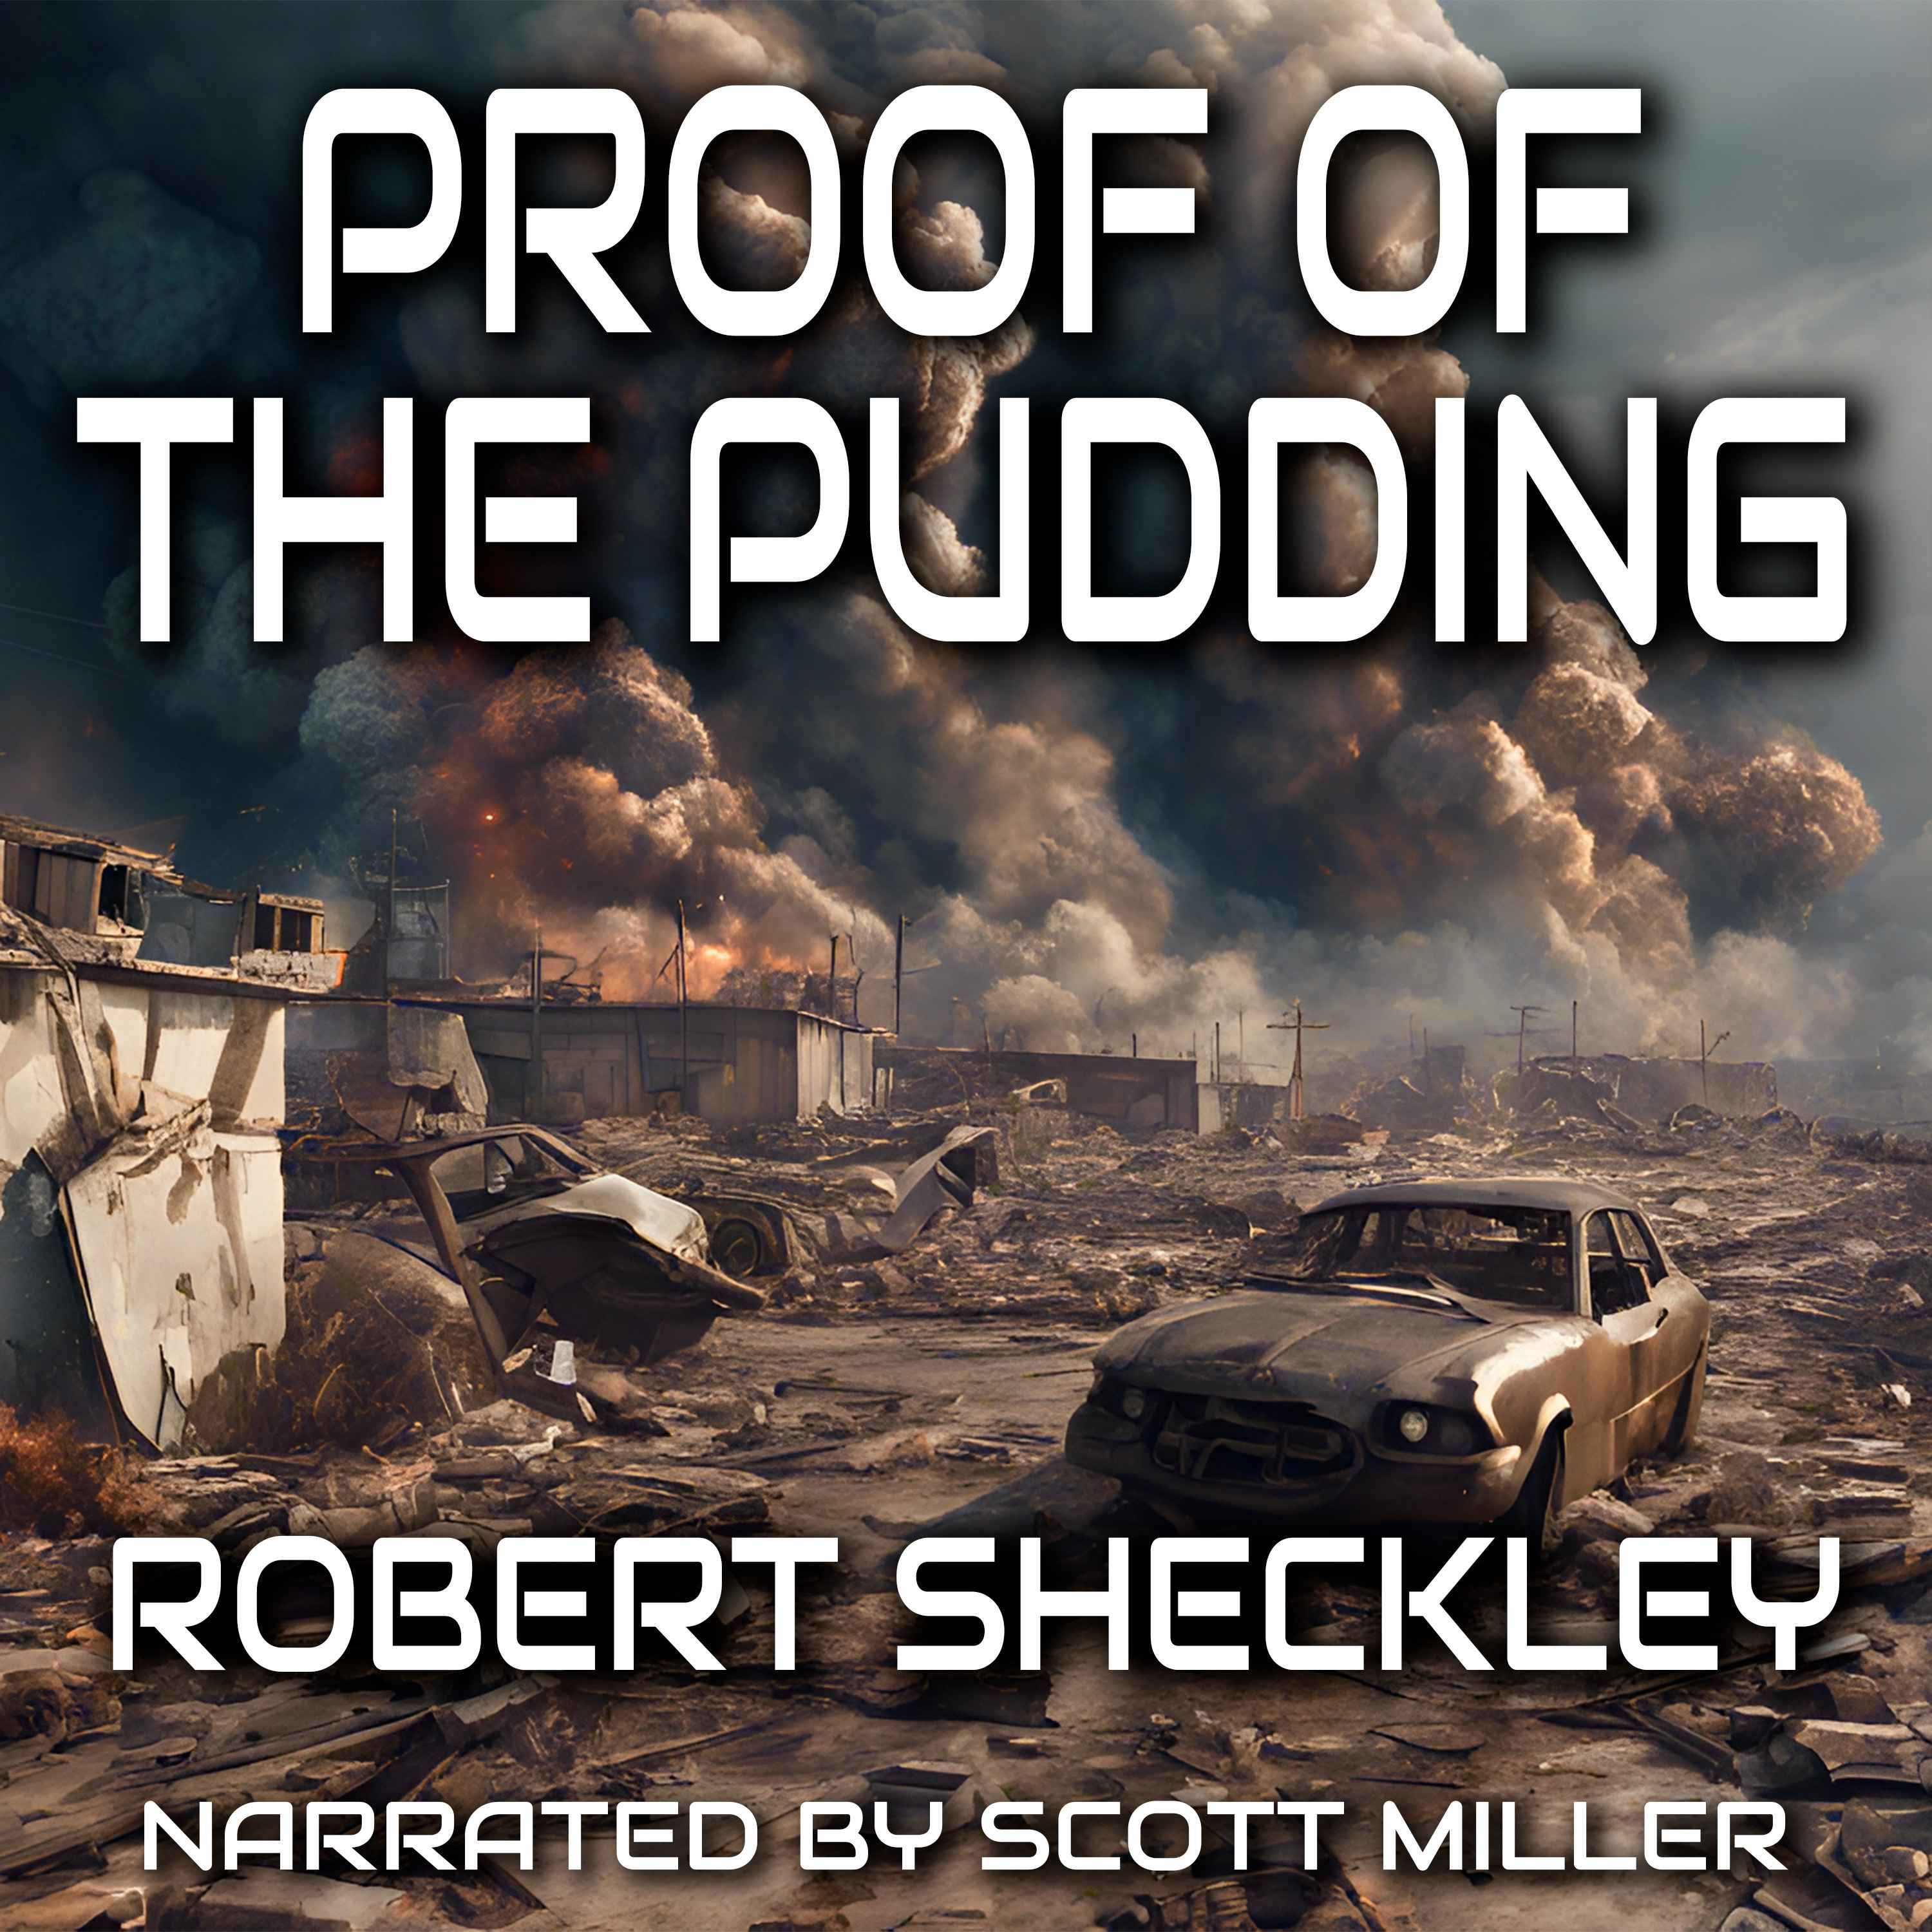 Proof of the Pudding by Robert Sheckley - Apocalyptic Sci-Fi Short Story from the 1950s